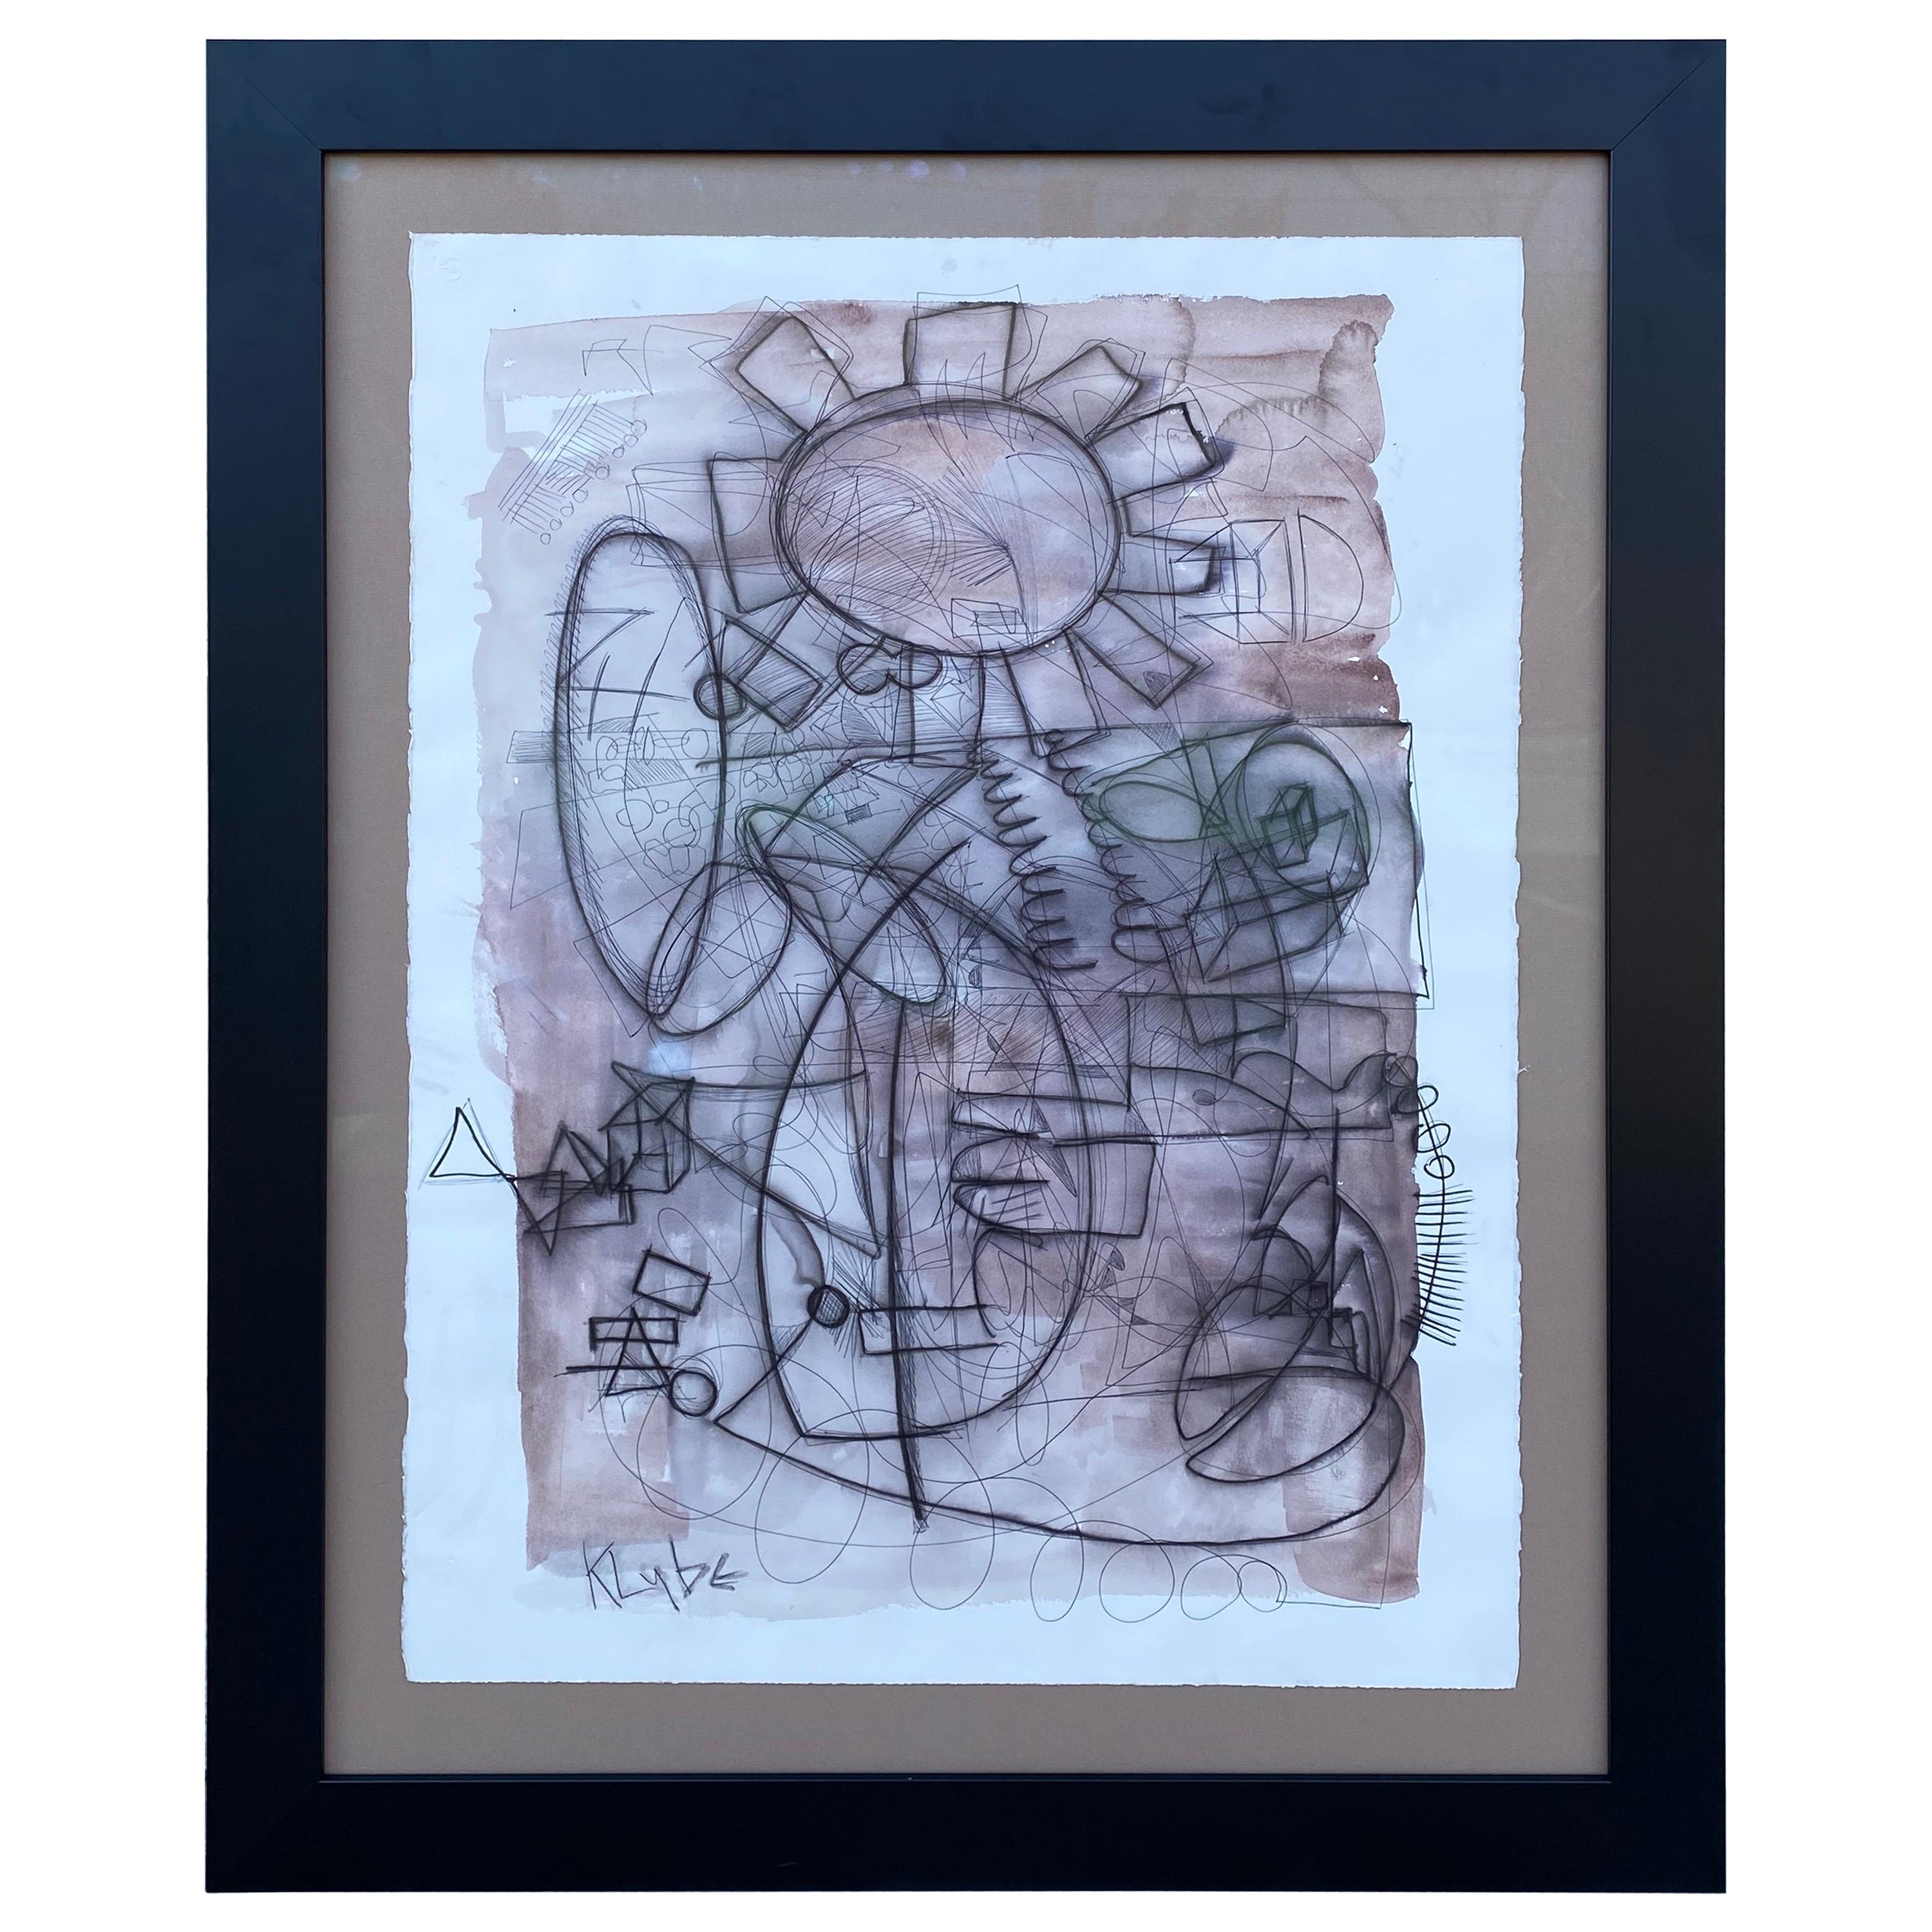 Framed Mixed Media Abstract on Paper by Texas Artist Karl Lubbering